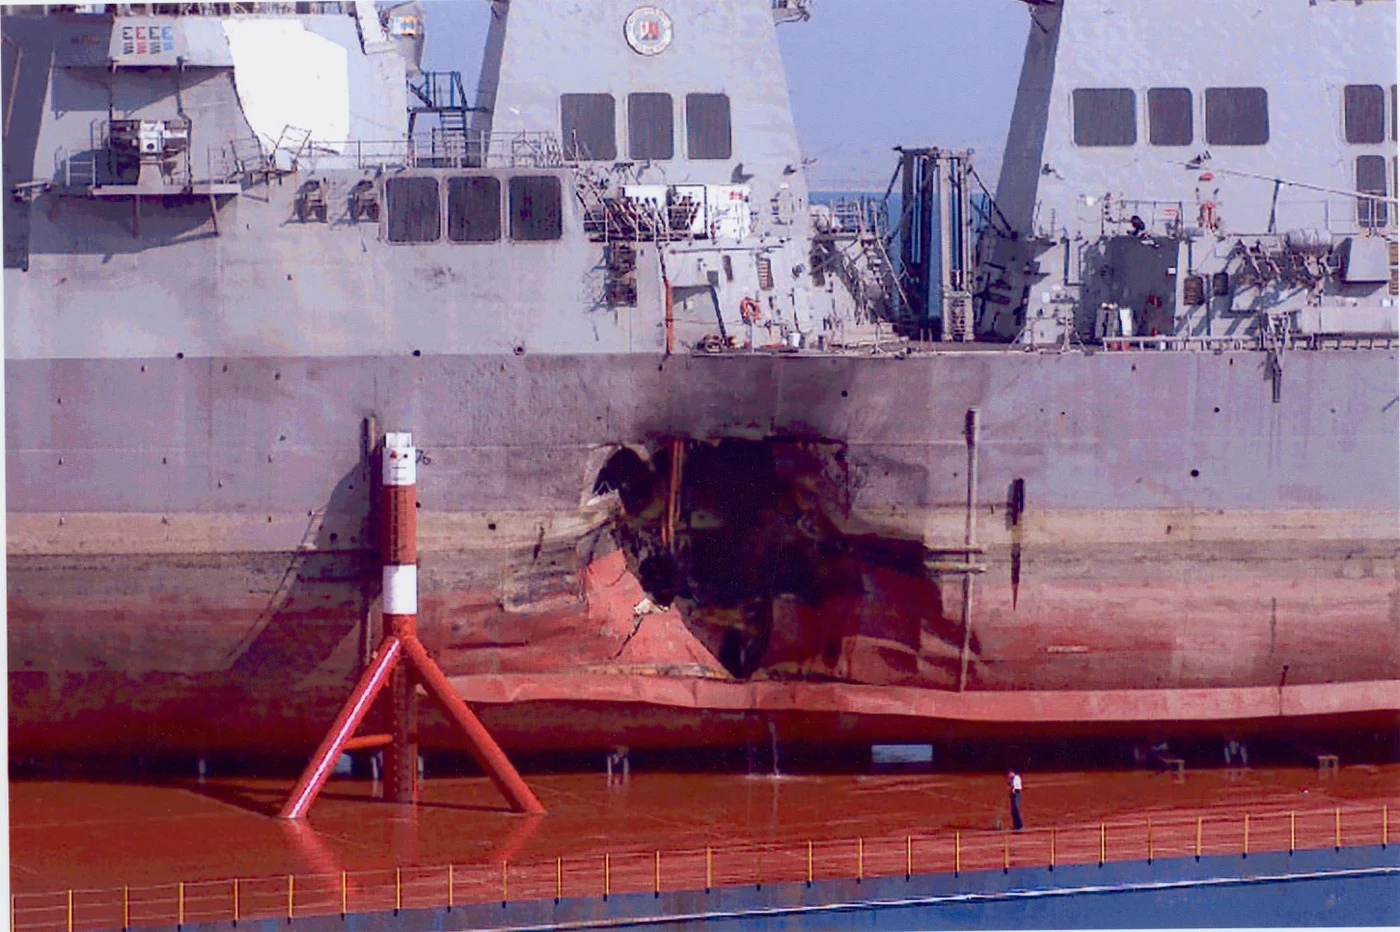 Exposed bomb site of USS Cole